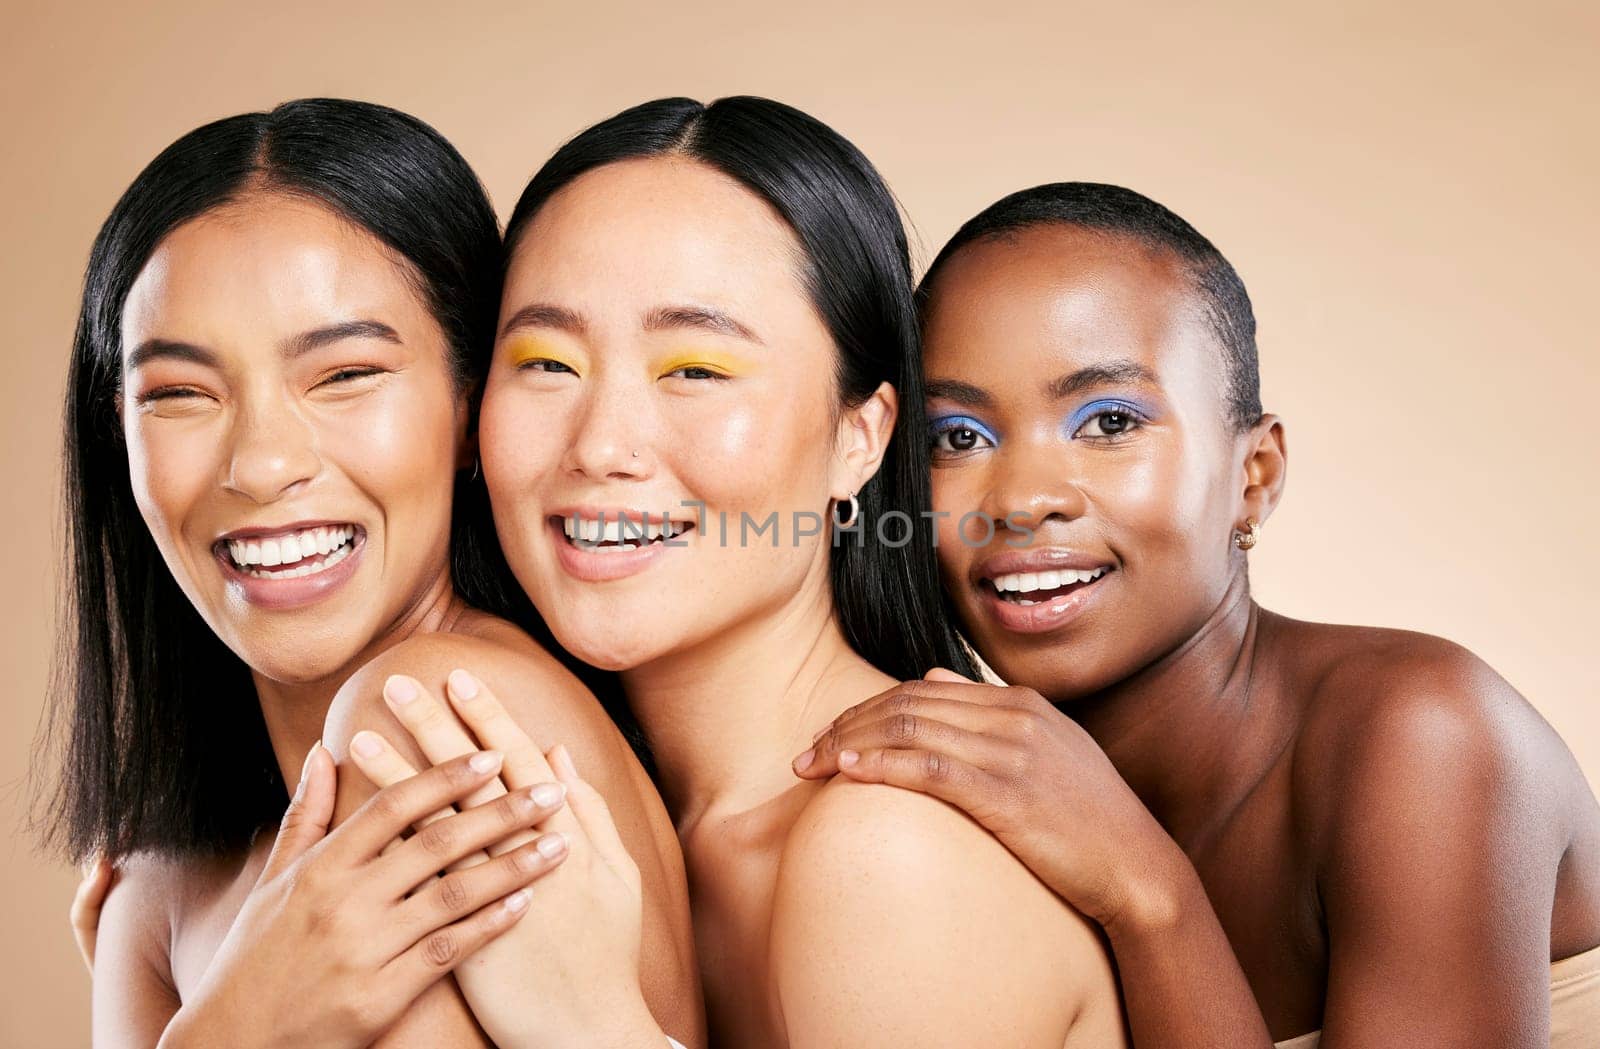 Makeup, diversity and woman happiness together for support, facial wellness and cosmetics dermatology care in brown background studio. Model, smile and interracial beauty inclusion with skin glow by YuriArcurs